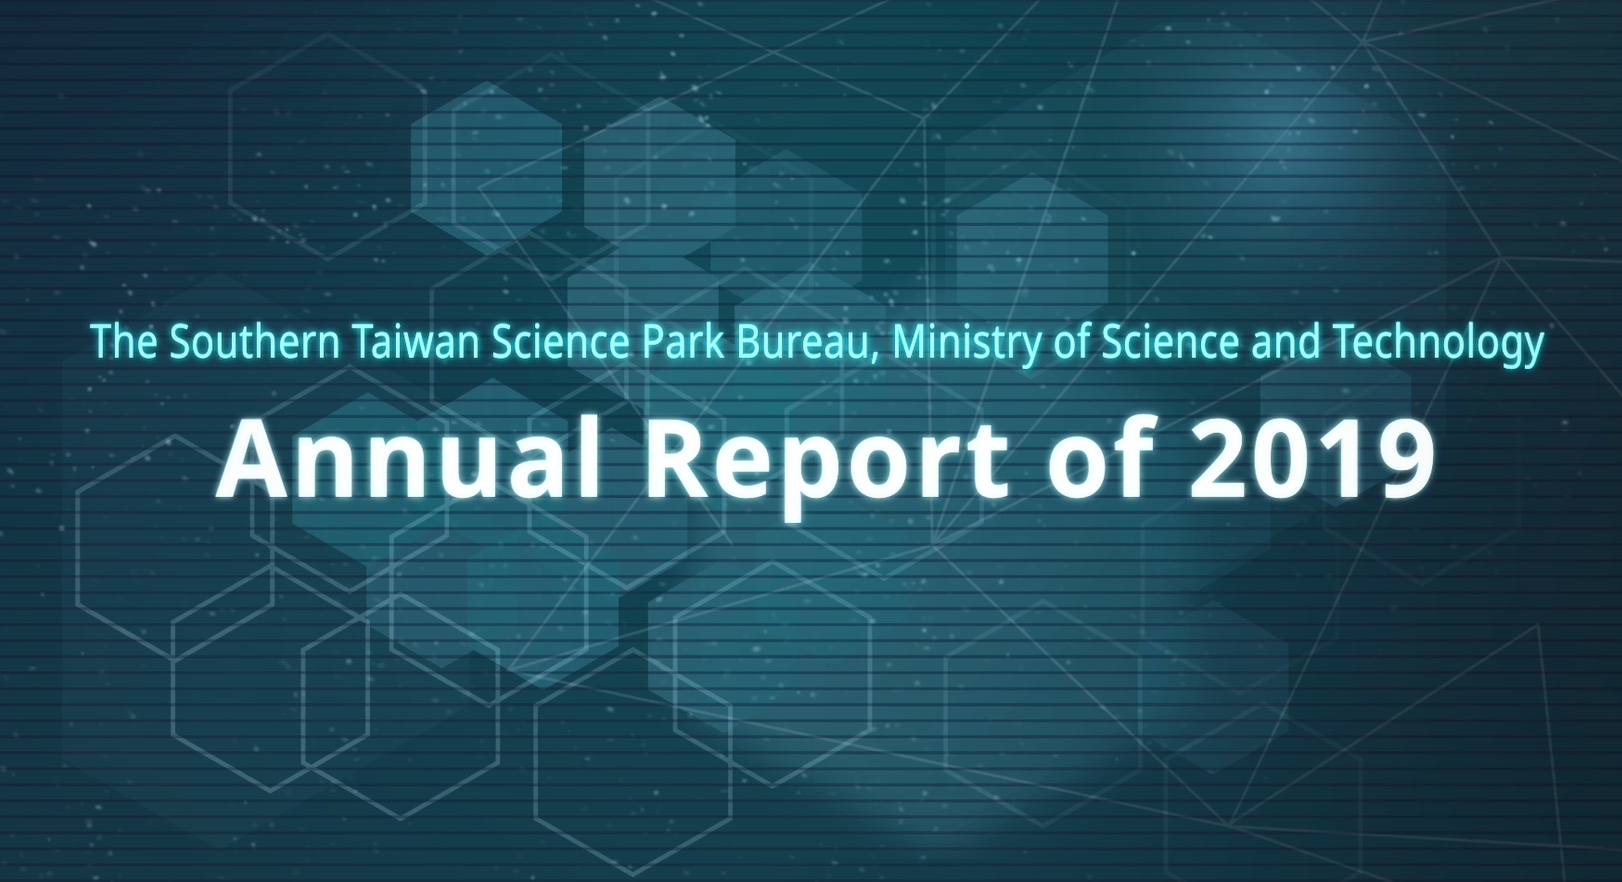 Southern Taiwan Science Park 2019 Annual Report(14:37 mins)